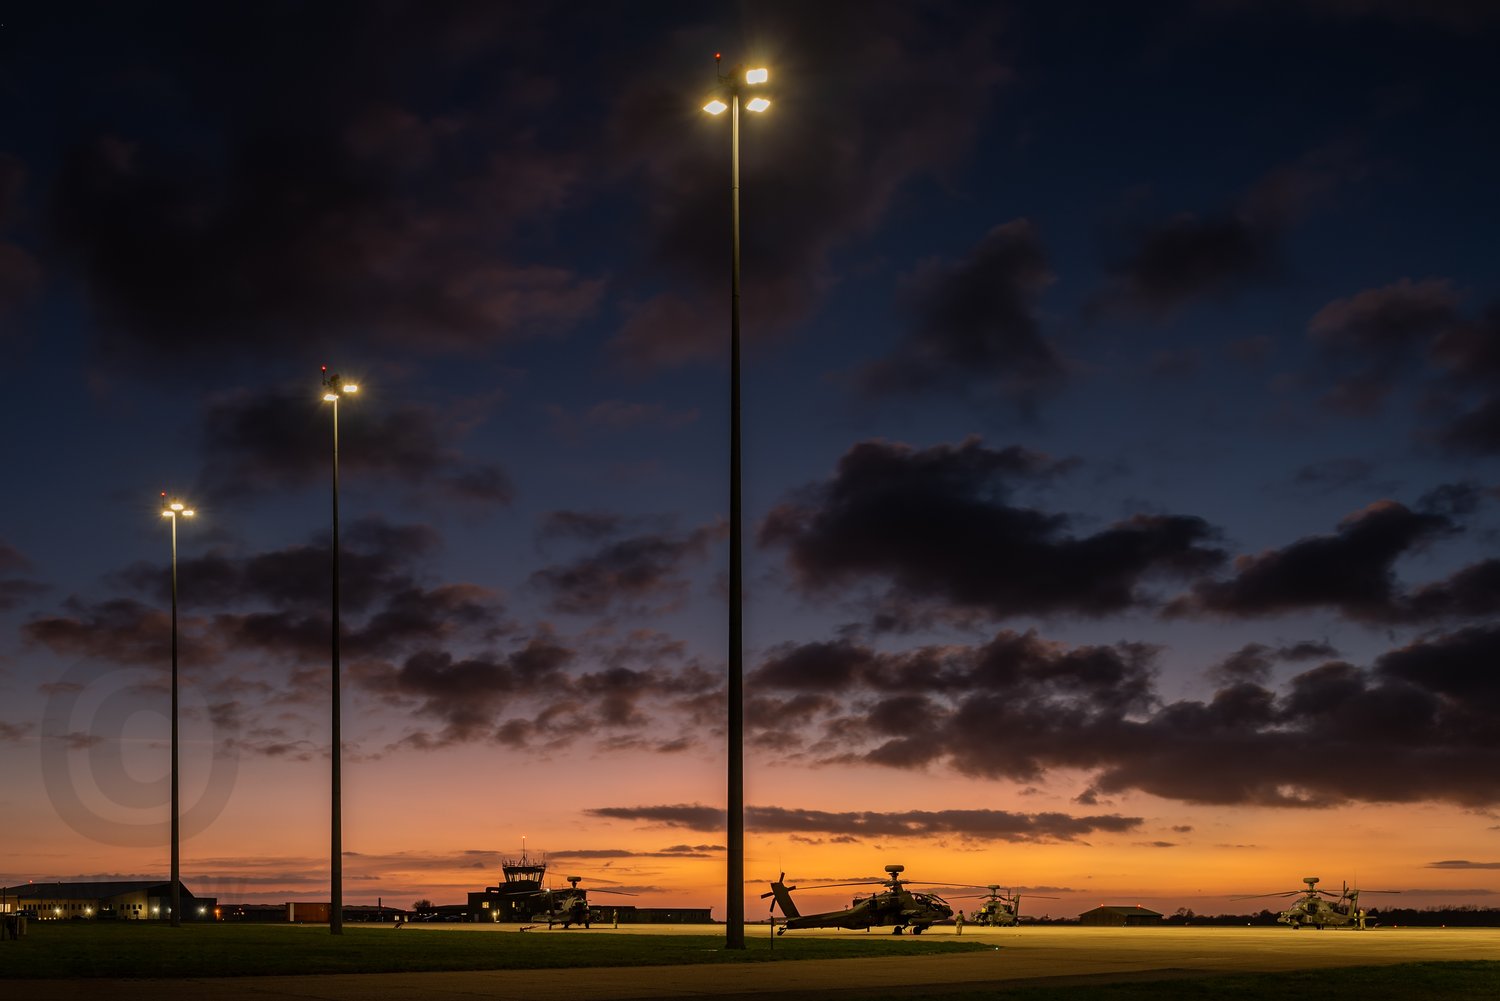 High+level+lighting+columns+with+apache+helicopters+wattisham+flying+station+lighting+photography+AH9_3291+A.jpg